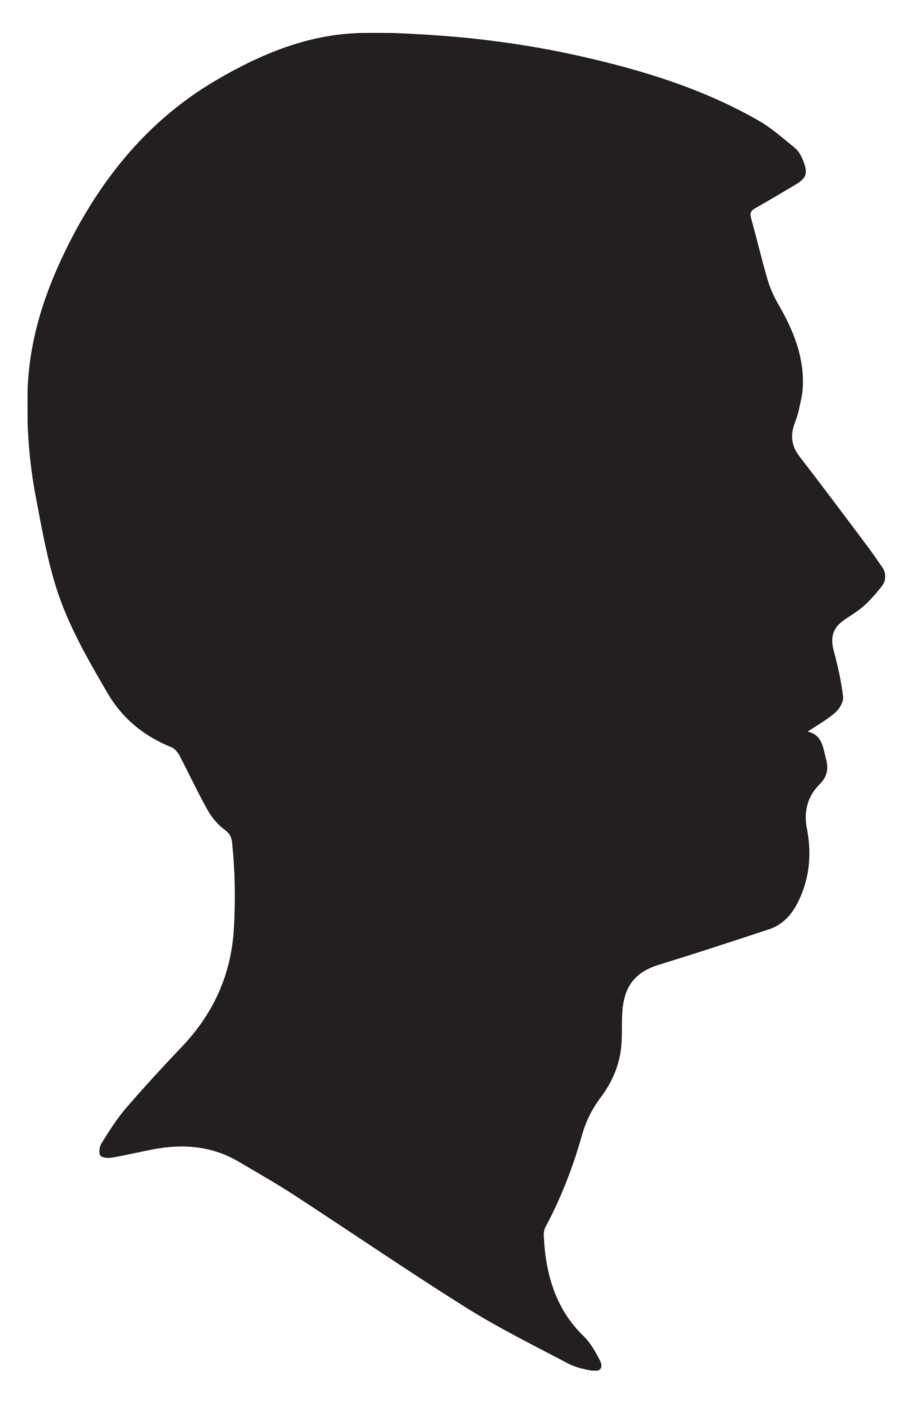 Male Silhouette Profile By Snicklefritz Stock On Deviantart